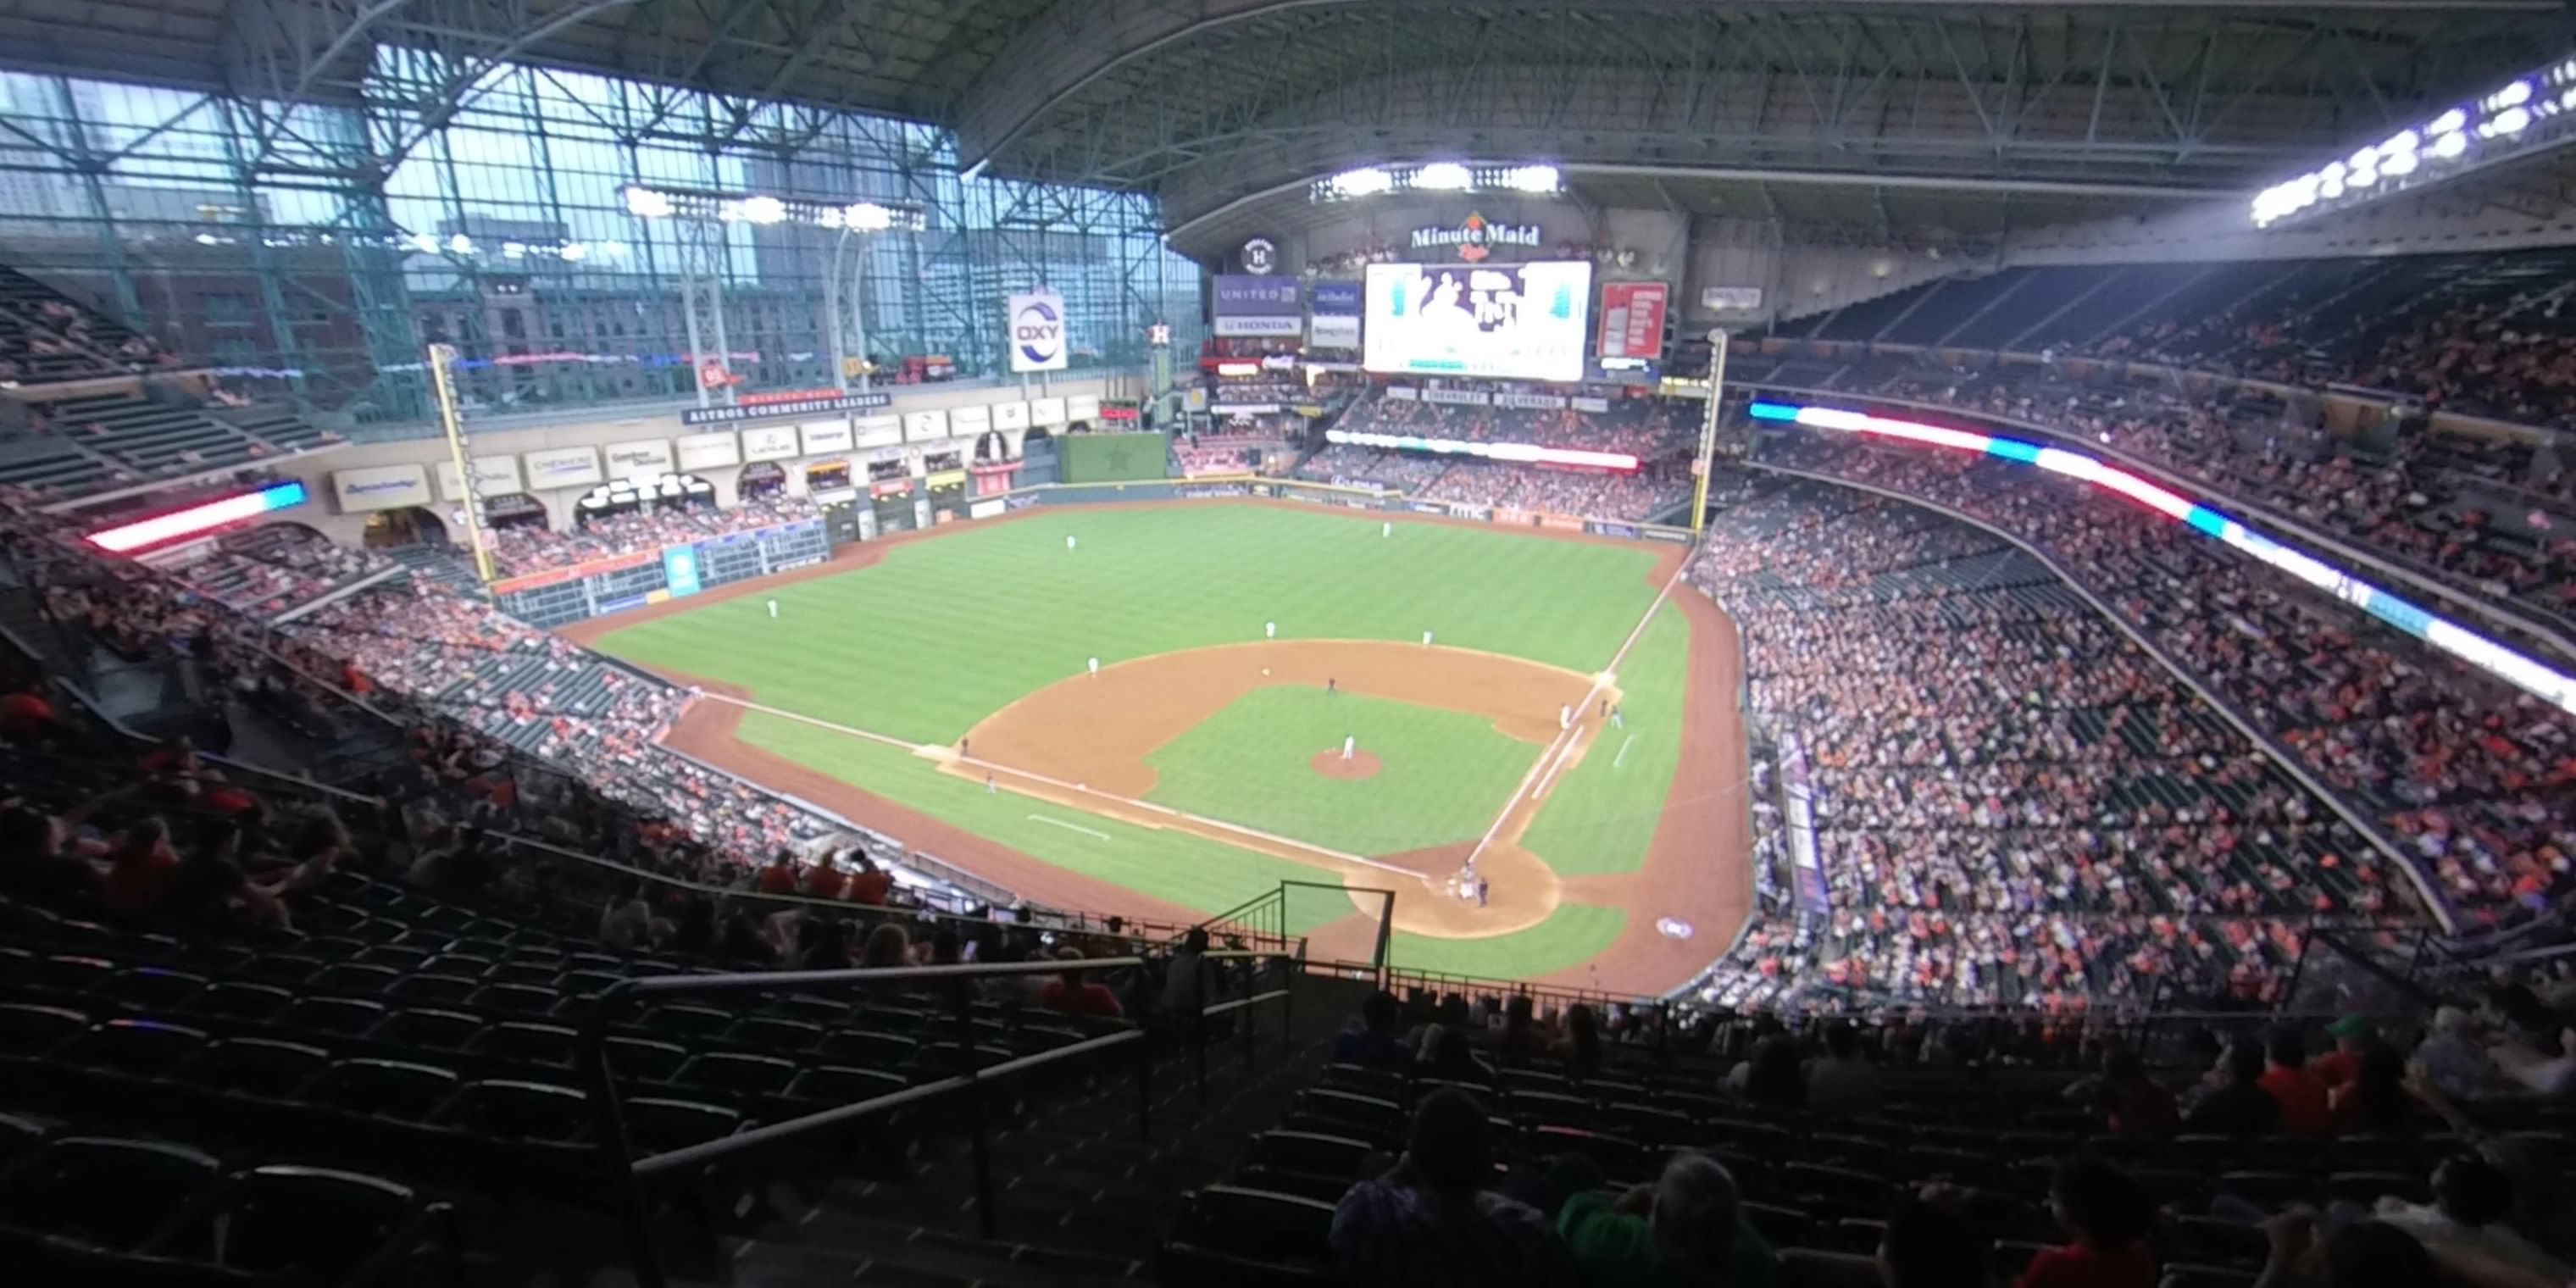 section 416 panoramic seat view  for baseball - minute maid park